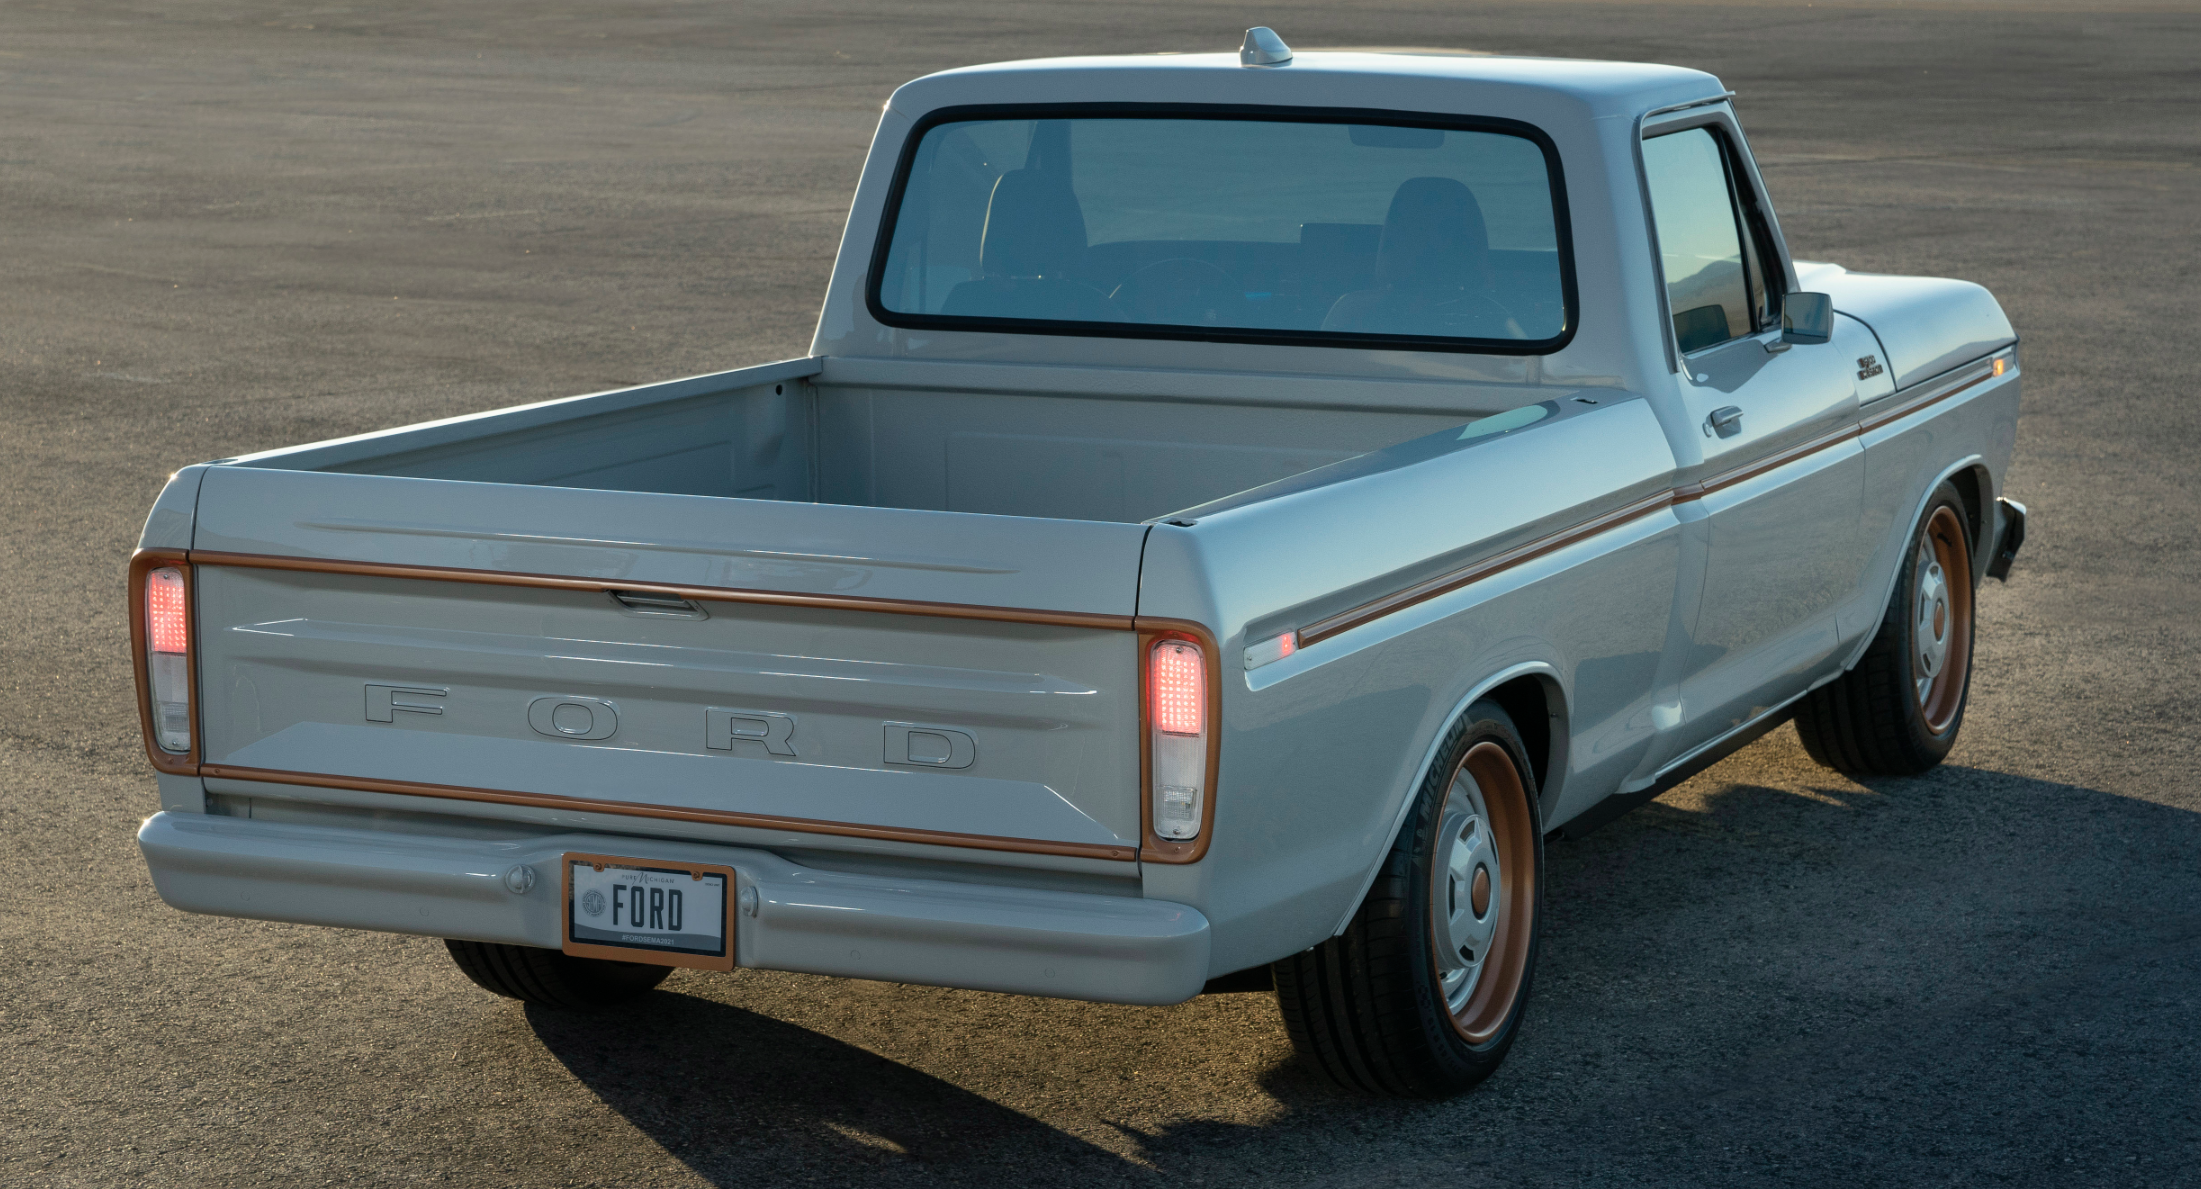 Ford Shows Off Their Electric Crate Motor In A Fantastic Resto-Mod 1978 F-100 Truck